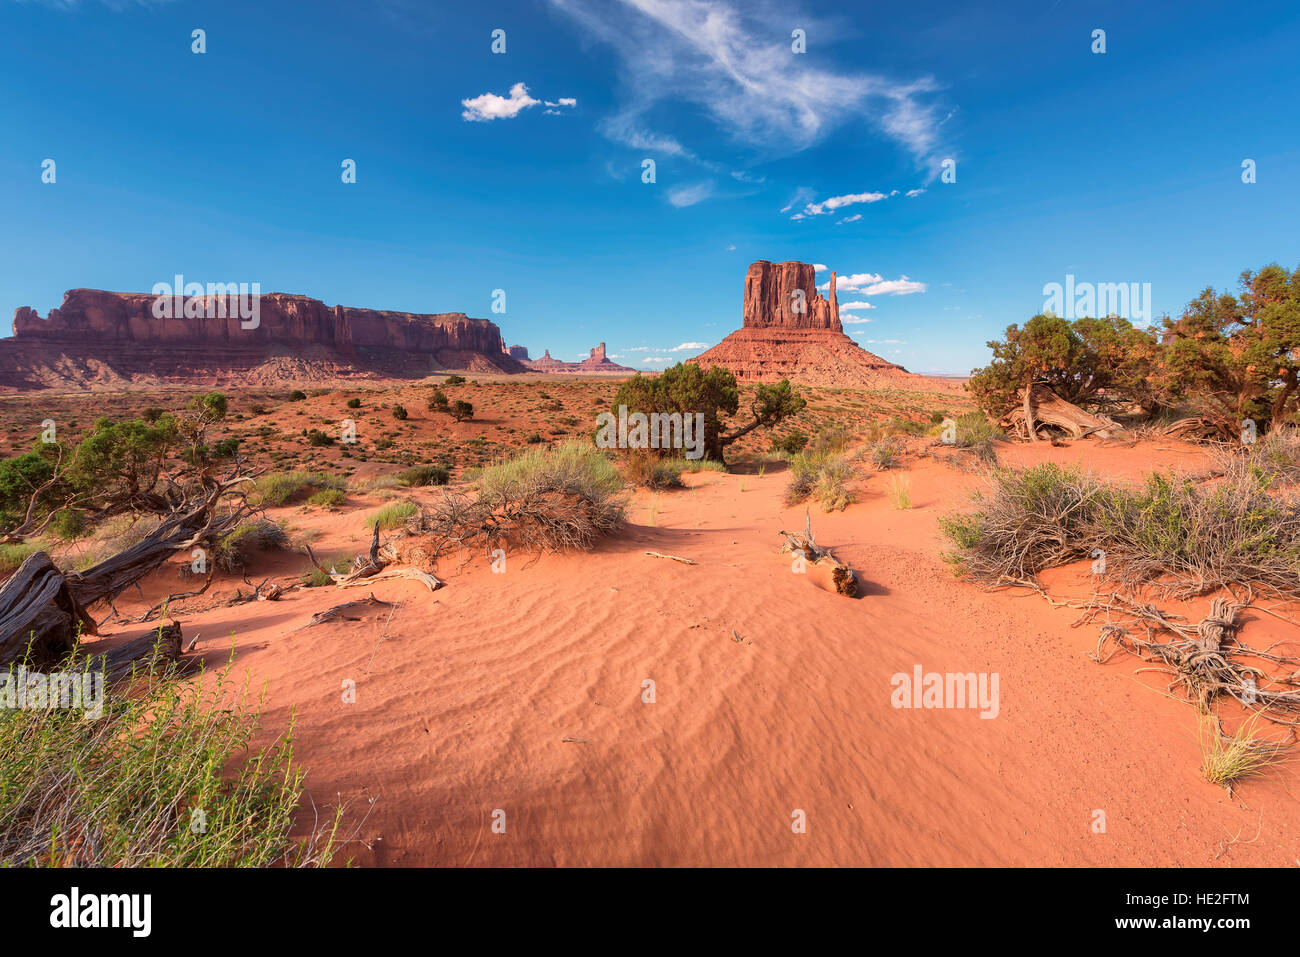 Sand dunes at Monument Valley Stock Photo